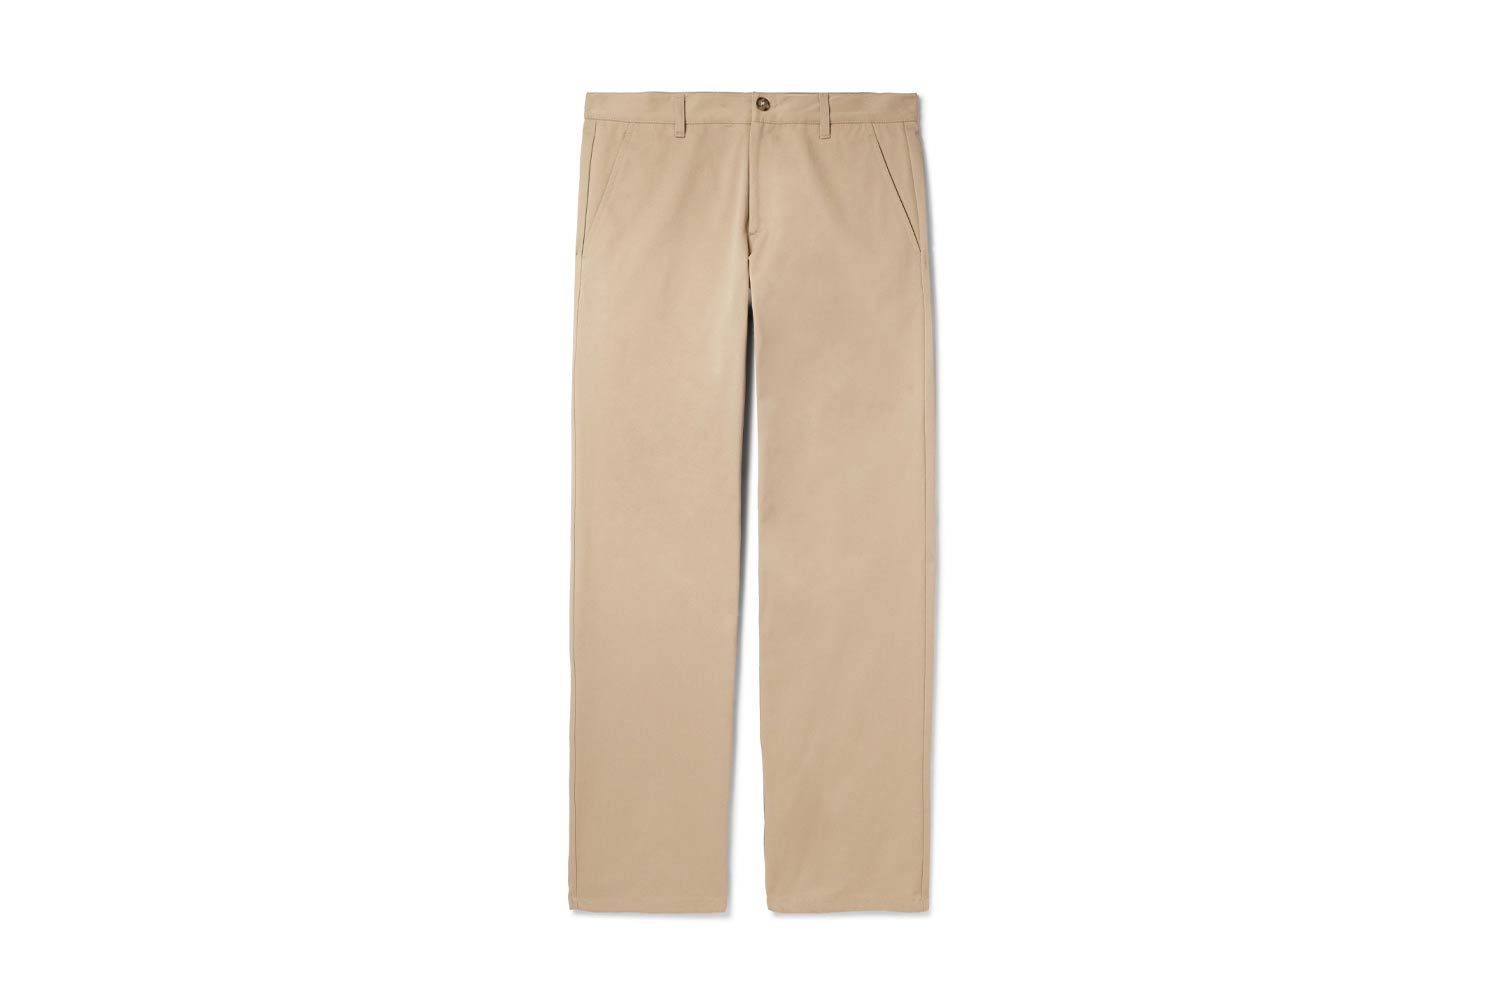 Beige pants on a white background